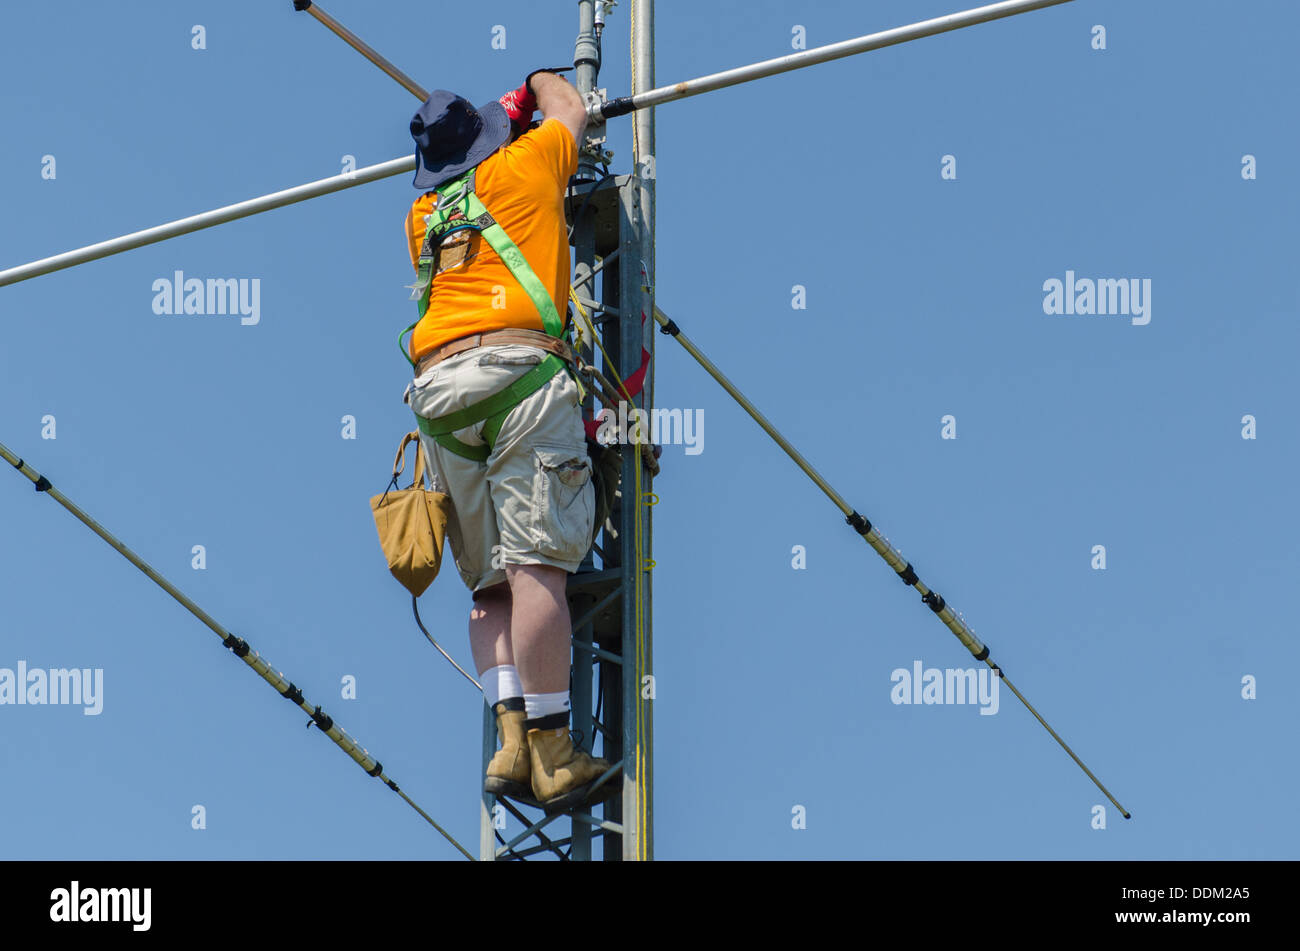 Man installing a amateur radio antenna at the top of radio tower. Stock Photo